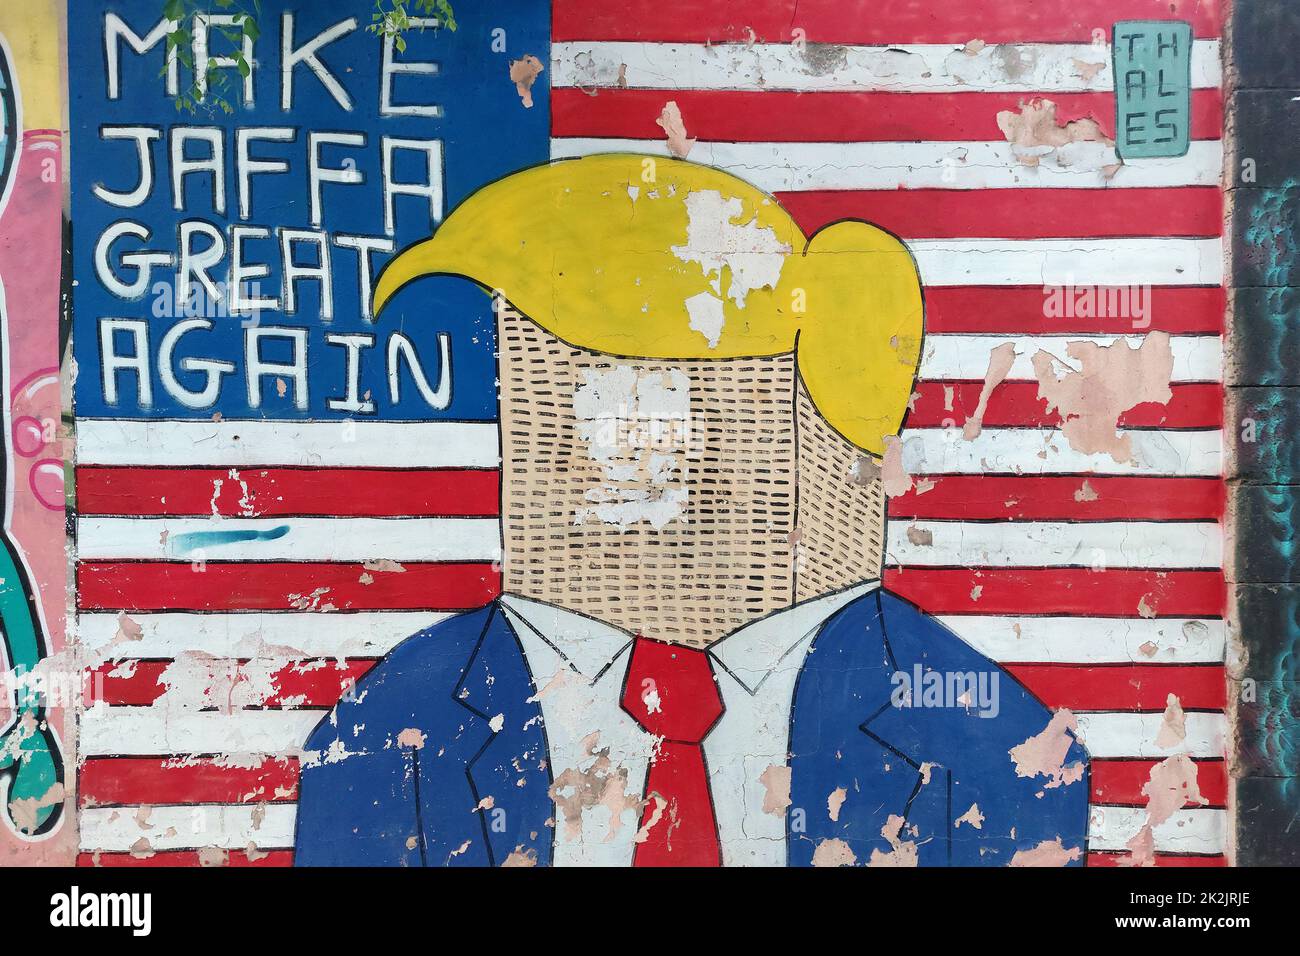 A painted wall in Old Jaffa depicts Donald Trump with the American flag and writing' Make Jaffa great again' Tel Aviv Israel Stock Photo